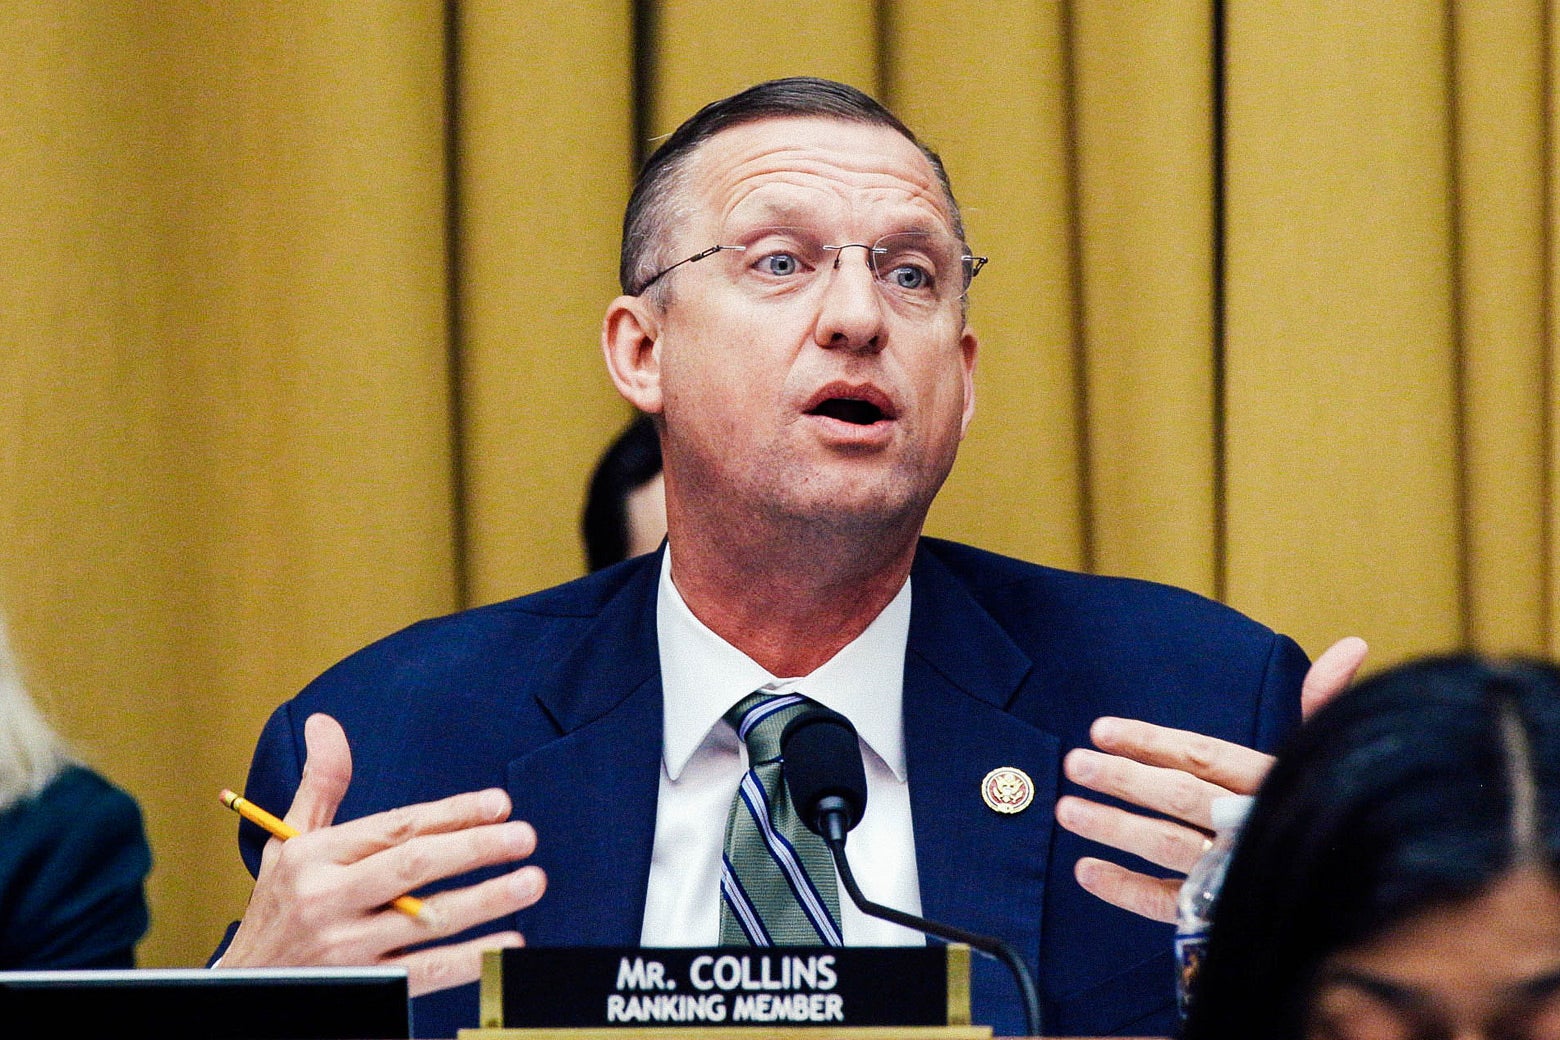 Doug Collins behind a name tag that says Mr. Collins, ranking member.